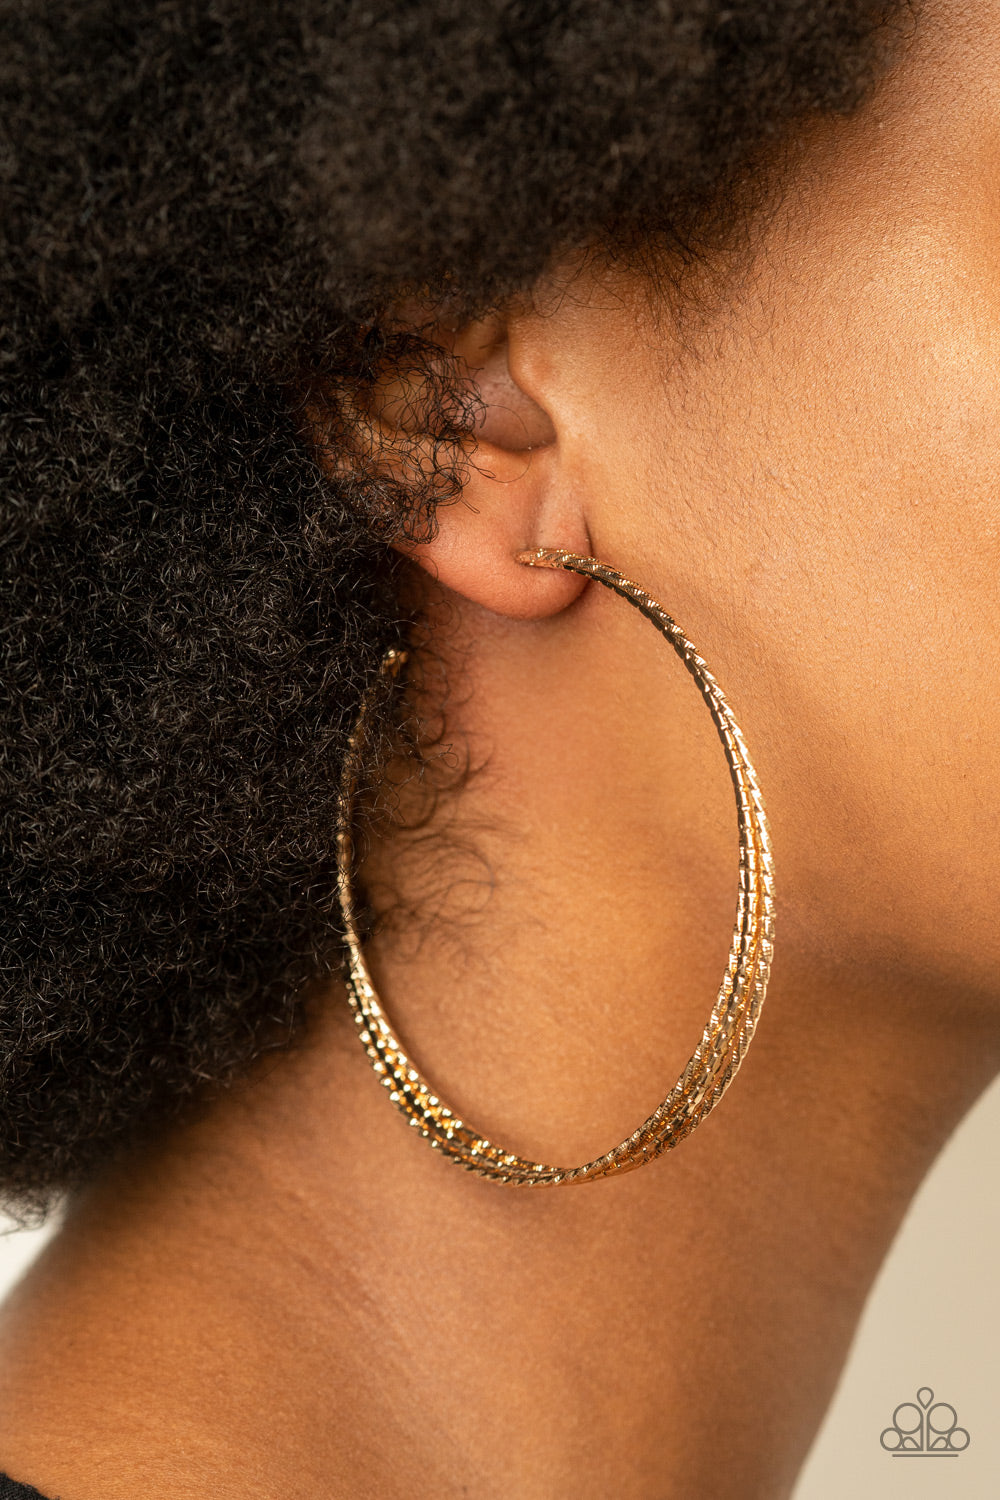 Watch and Learn Gold-Earrings